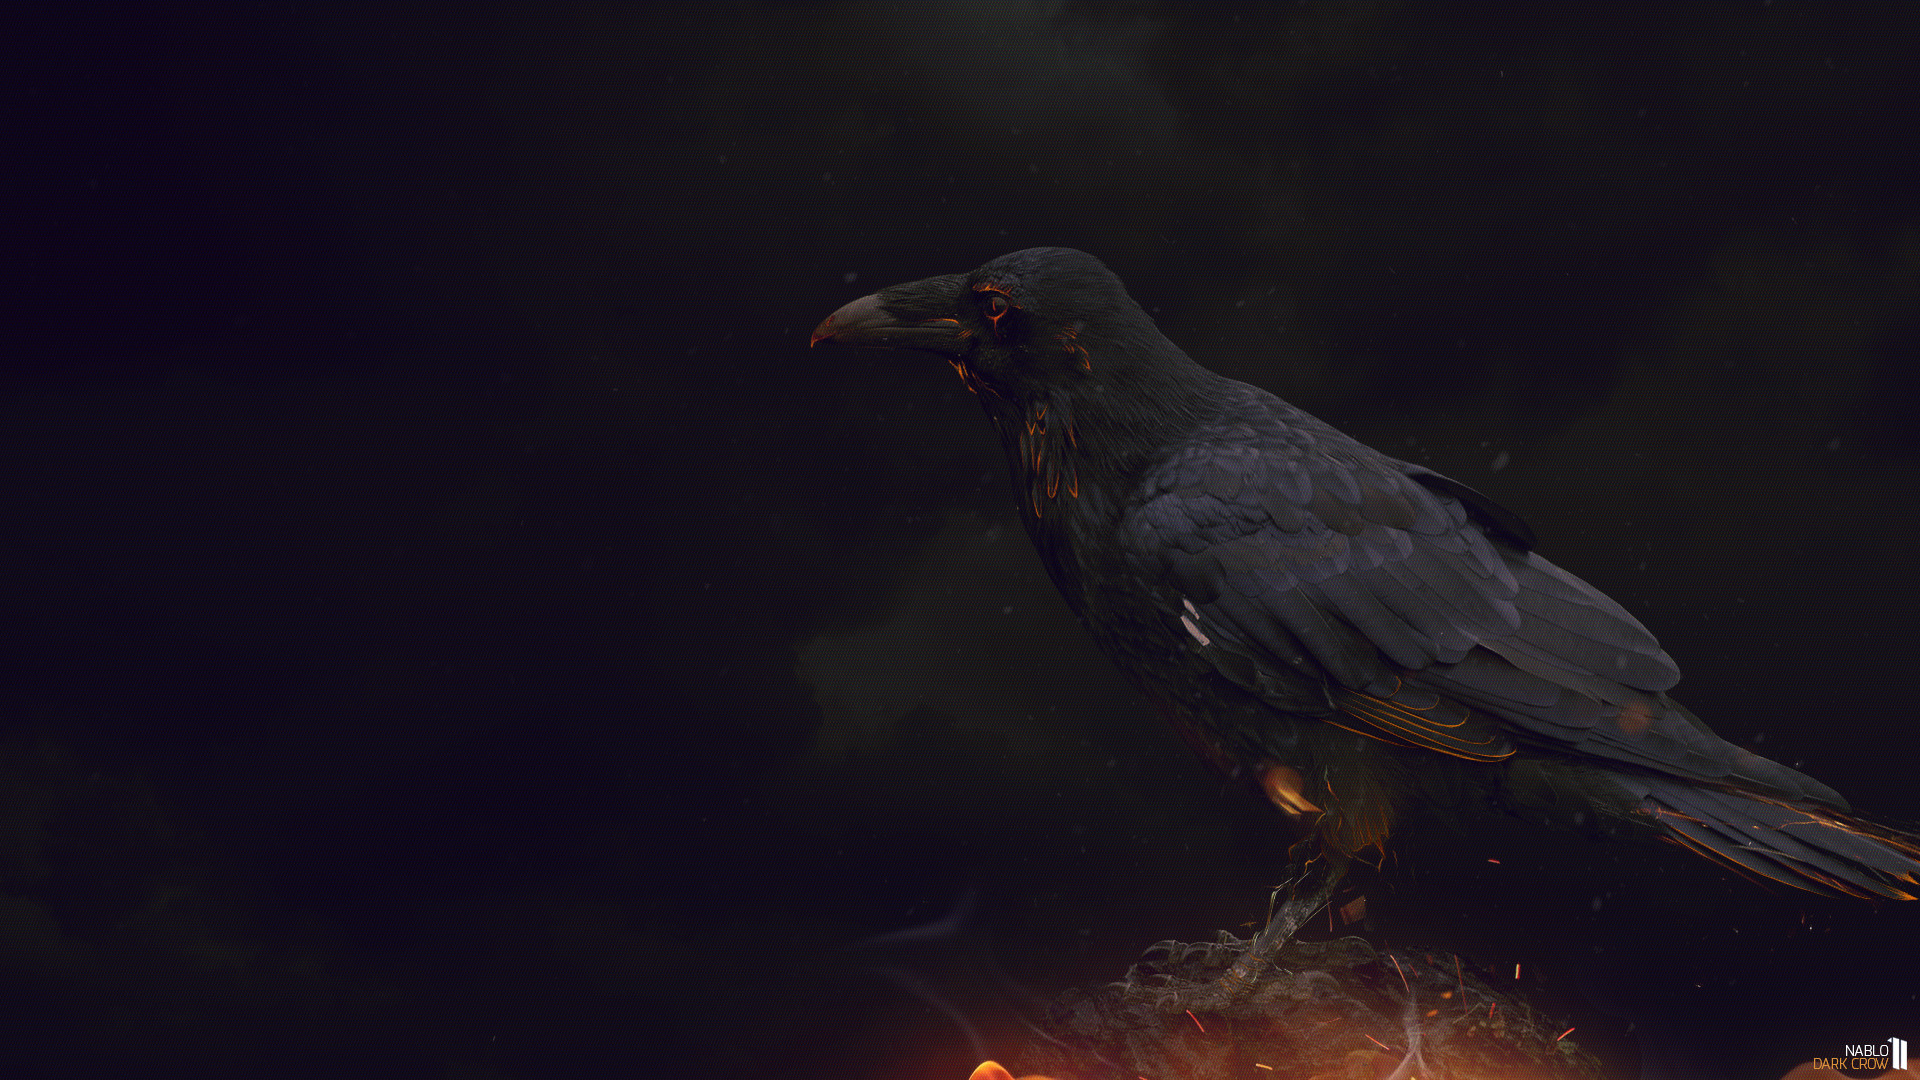 1920x1080 Dark Crows over the Forrest wallpaper from Dark wallpapers - Woul...